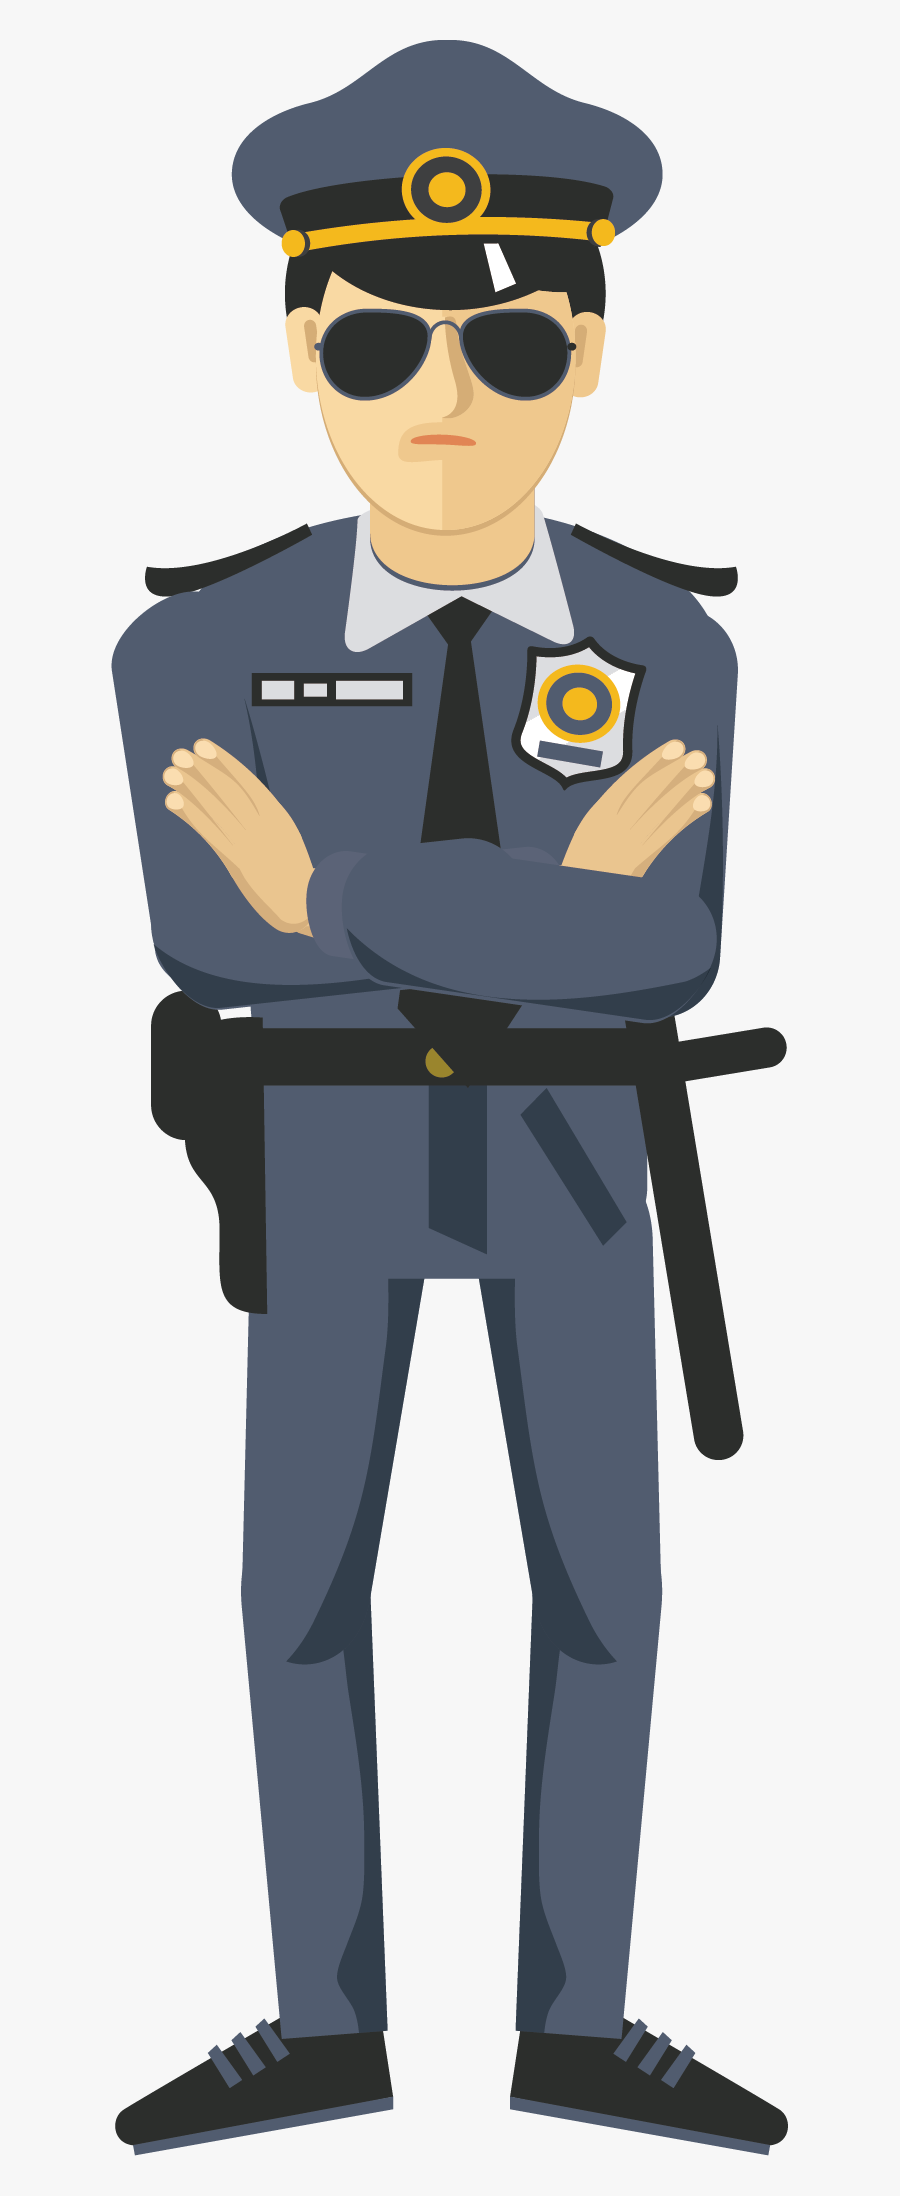 Element Police Officer Icon Hd Image Free Png Clipart - Animated Images Of Police, Transparent Clipart